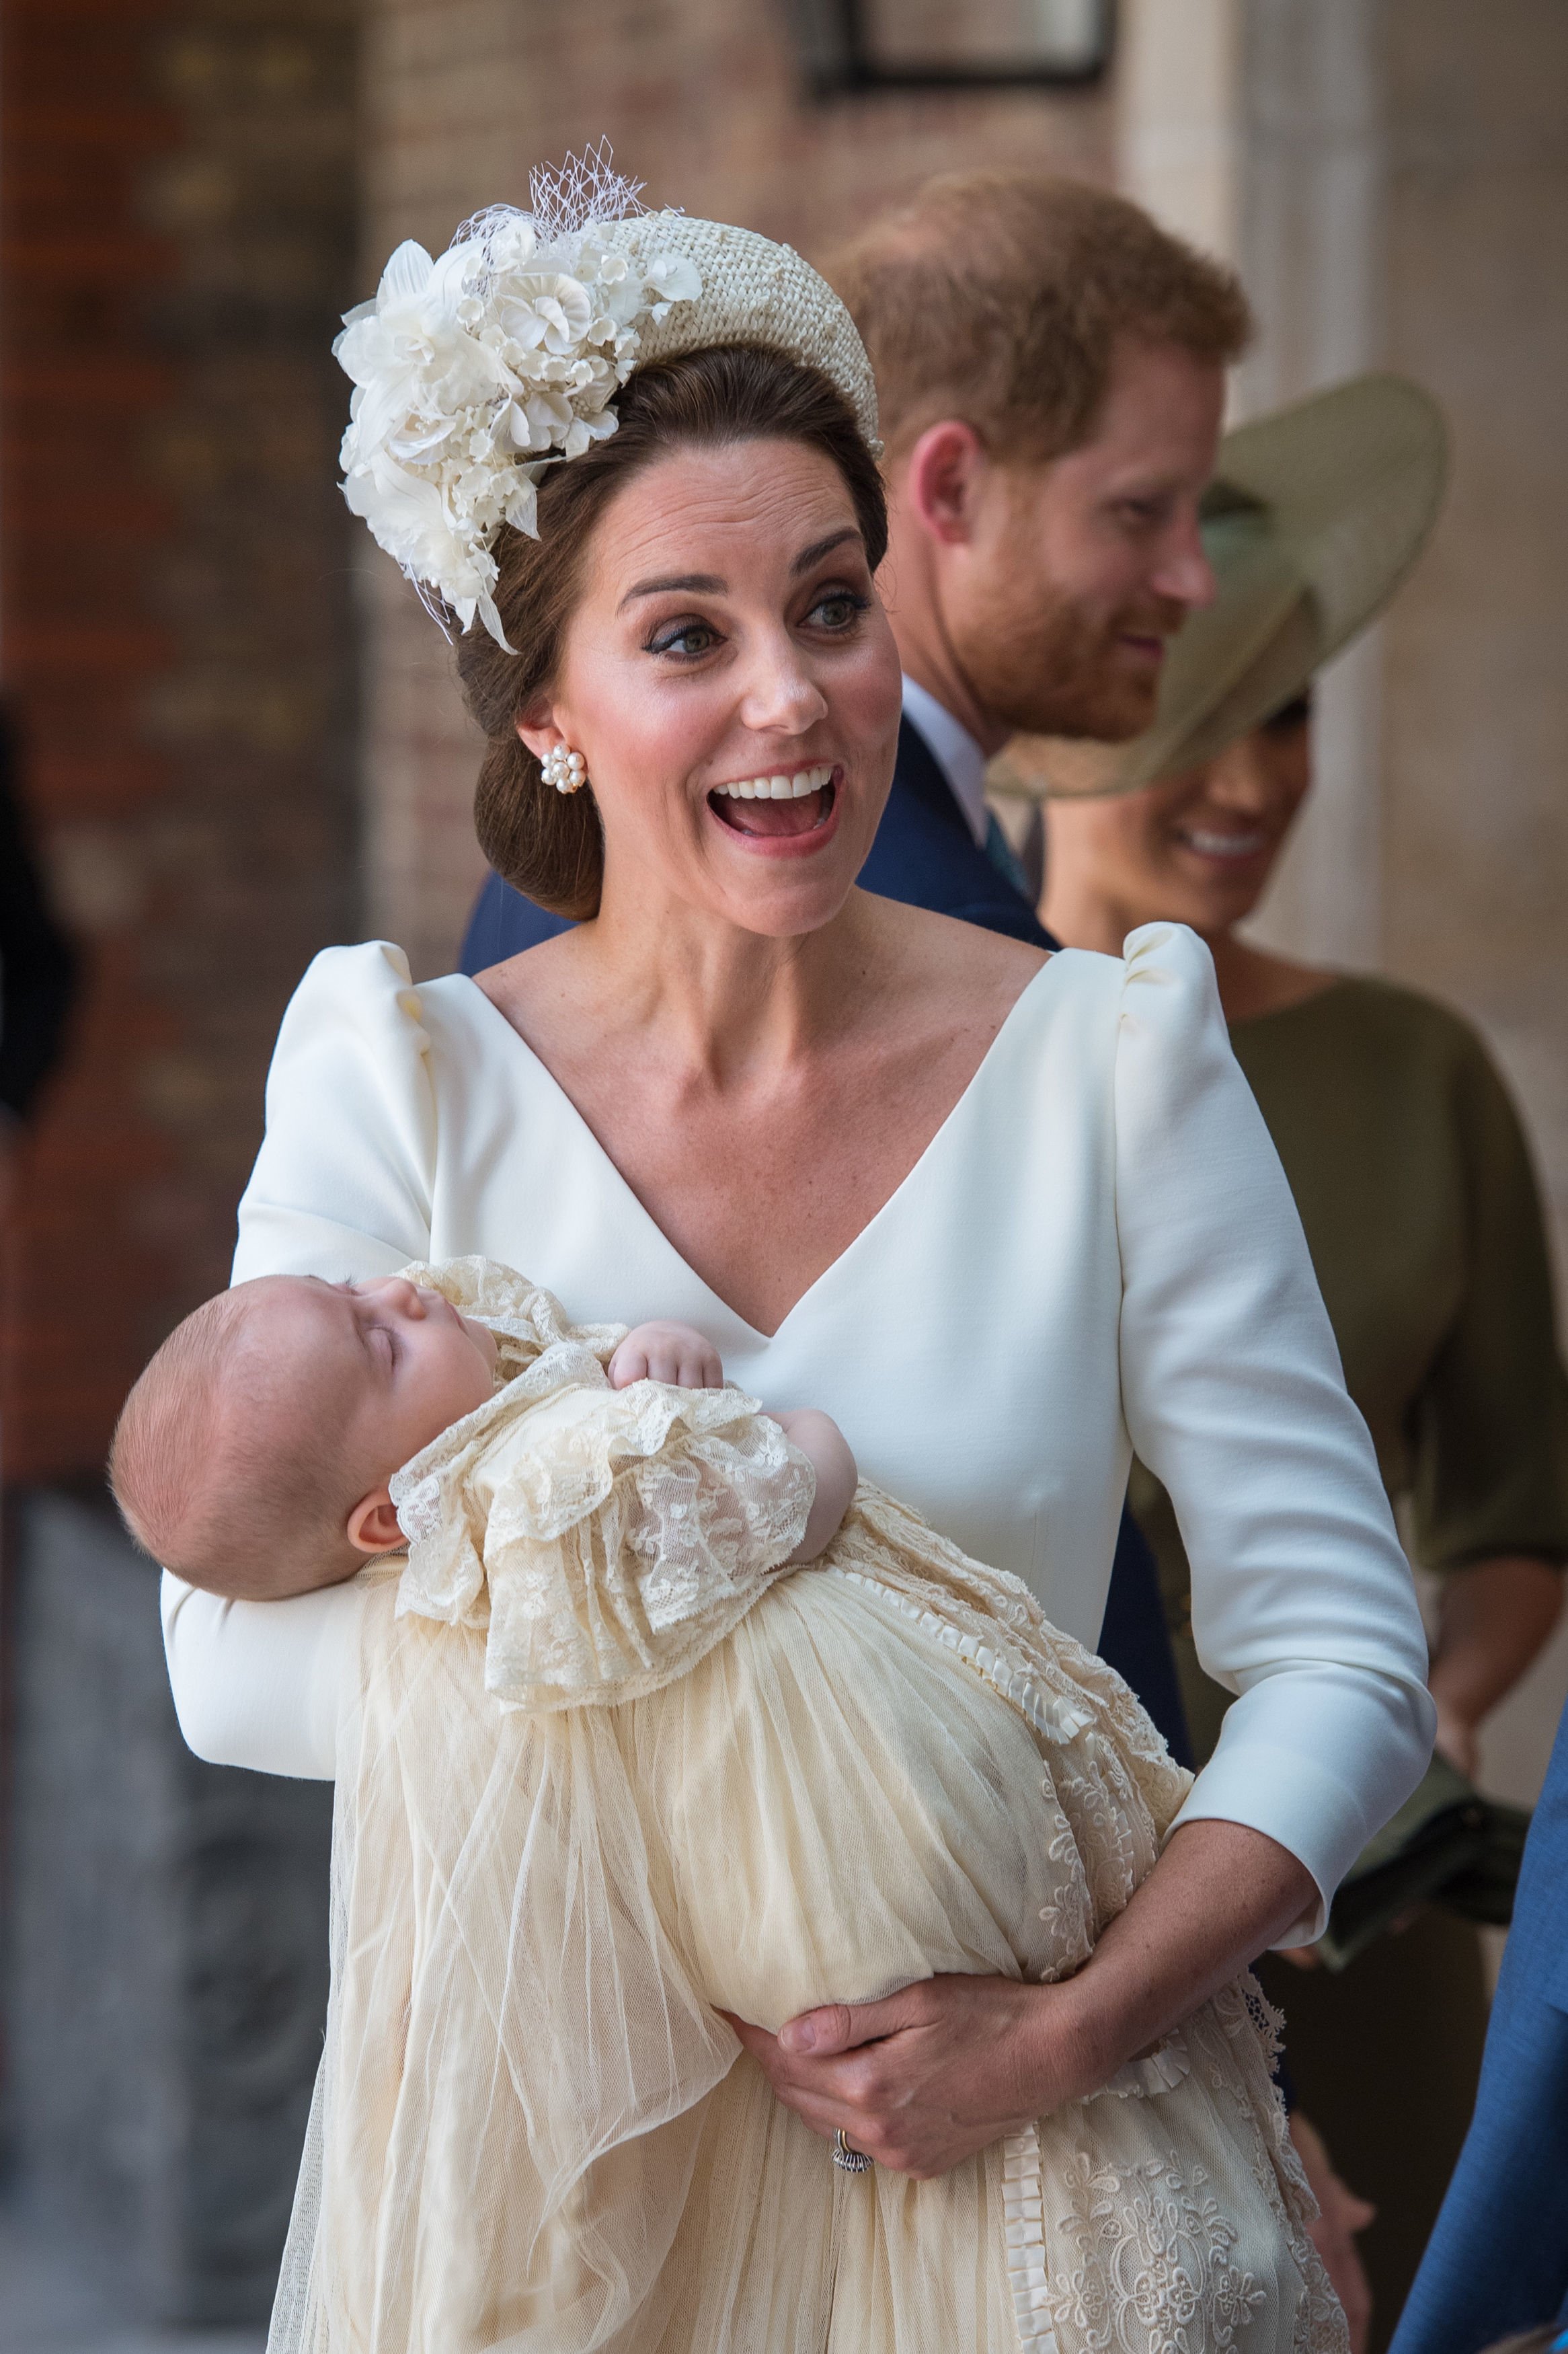 Prince Louis wearing the replica of the royal christening gown while being held by Kate Middleton at St James's Palace in London, England | Photo: Getty Images